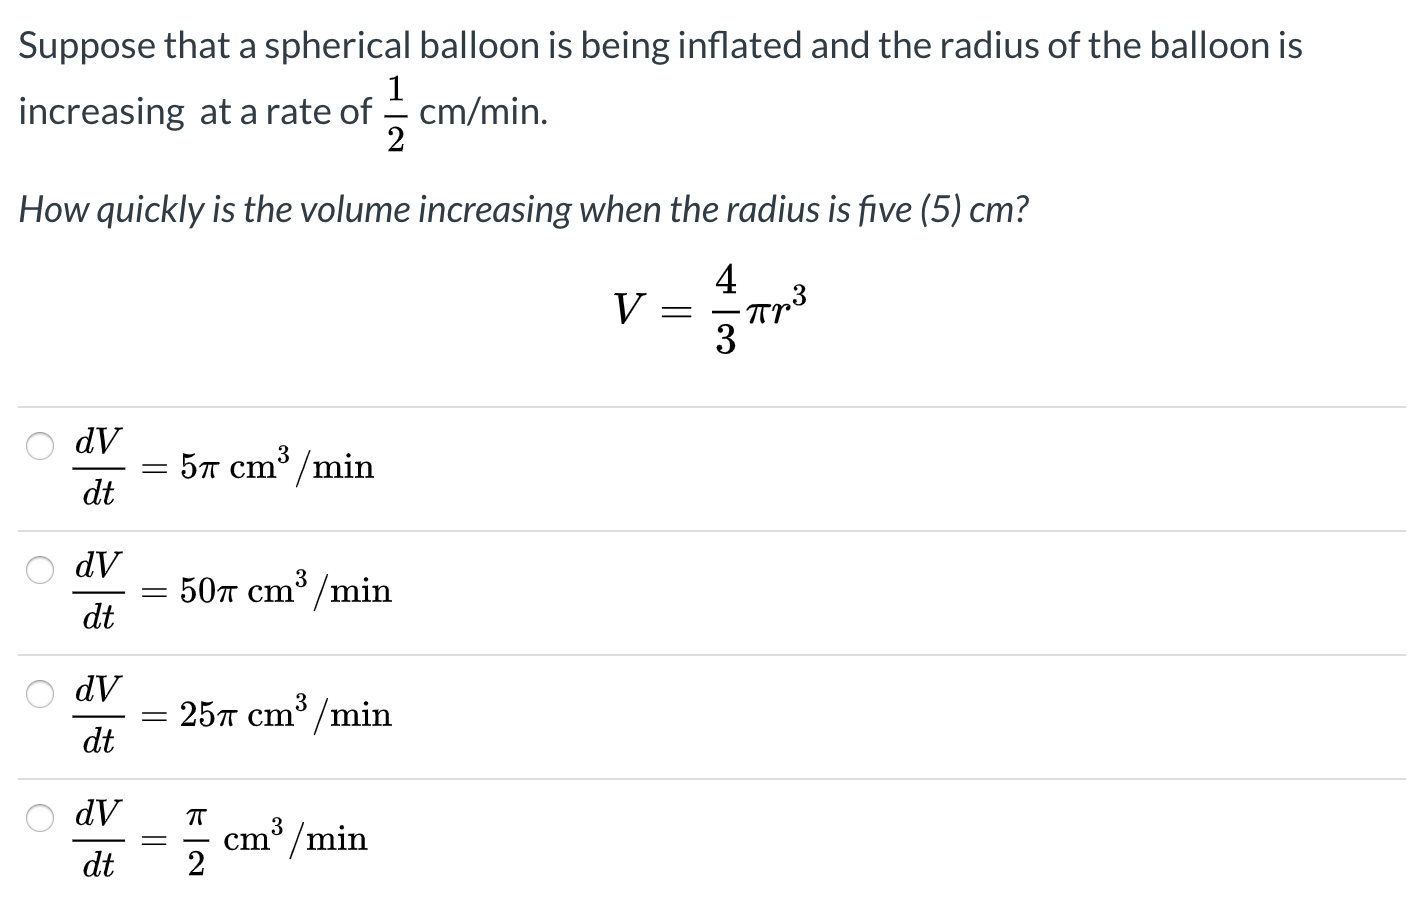 Suppose that a spherical balloon is being inflated and the radius of the balloon is
increasing at a rate of - cm/min.
2
How quickly is the volume increasing when the radius is five (5) cm?
4
dV
5л ст /min
dt
ЛР
507 cm³ /min
dt
dV
3
25T cm /min
dt
dV
3
cm /min
dt
||
